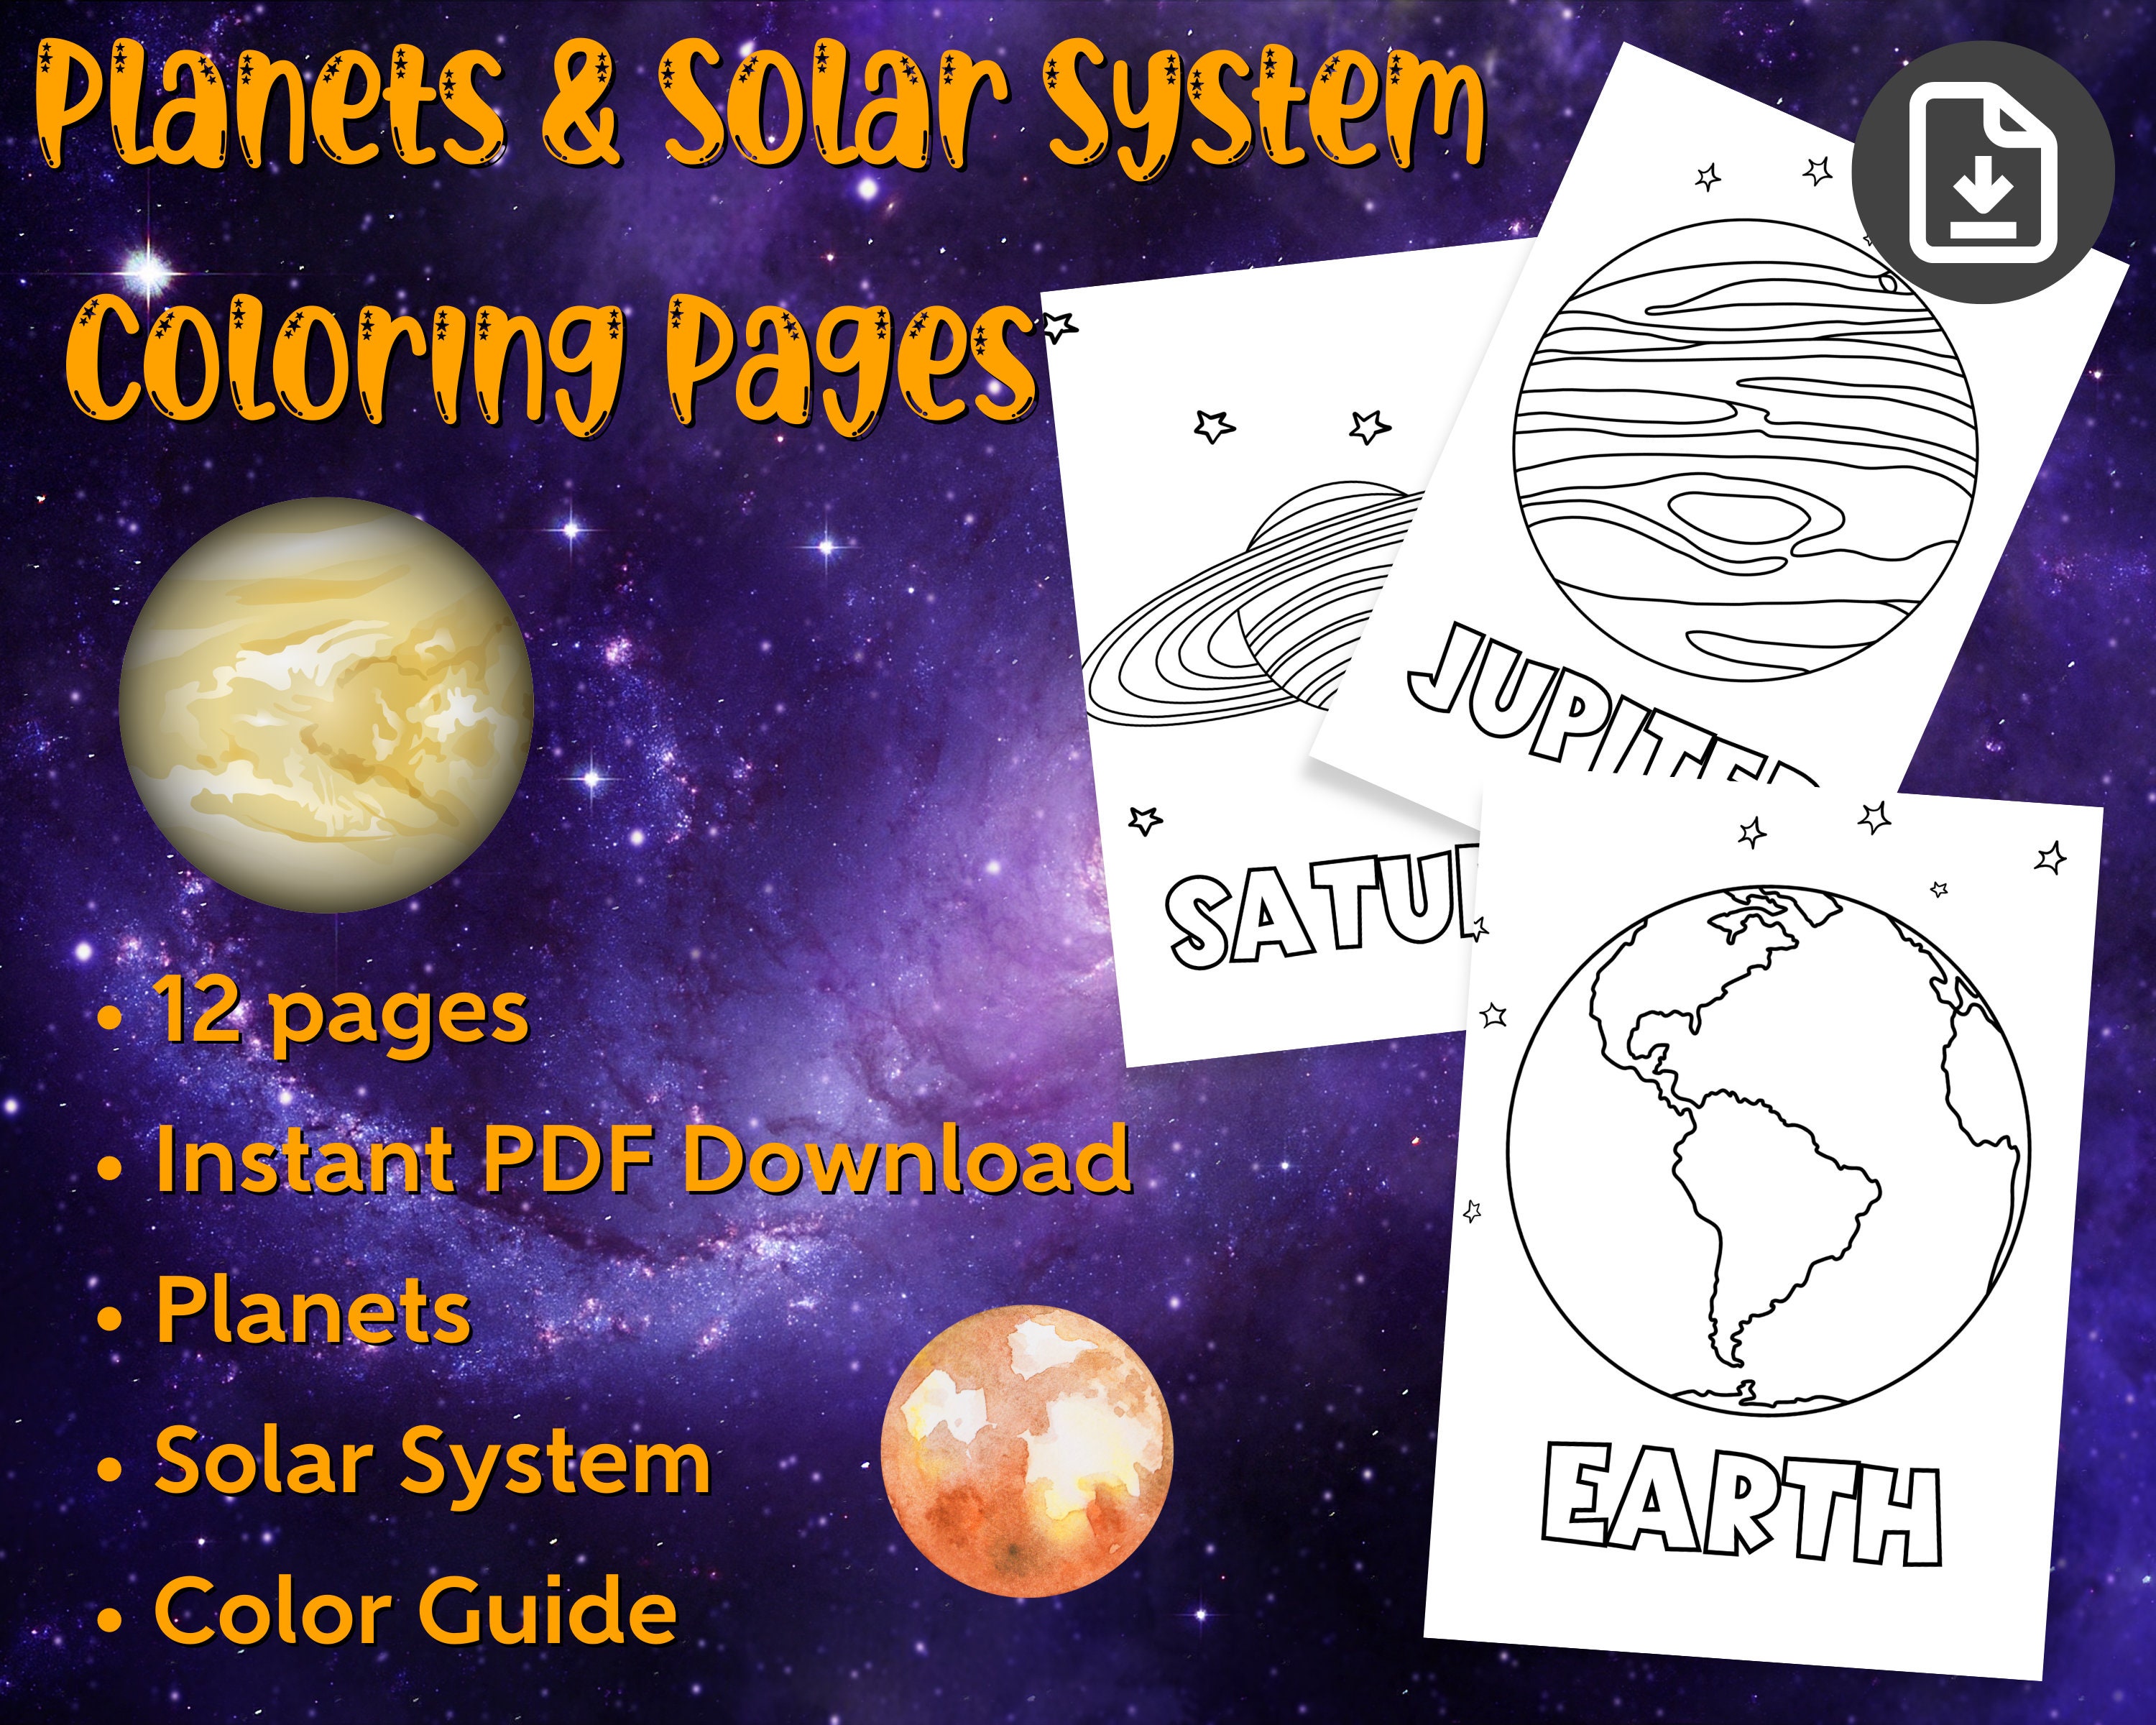 Planet coloring pages solar system printable science printables educational coloring coloring sheets for kids print at home pdf print